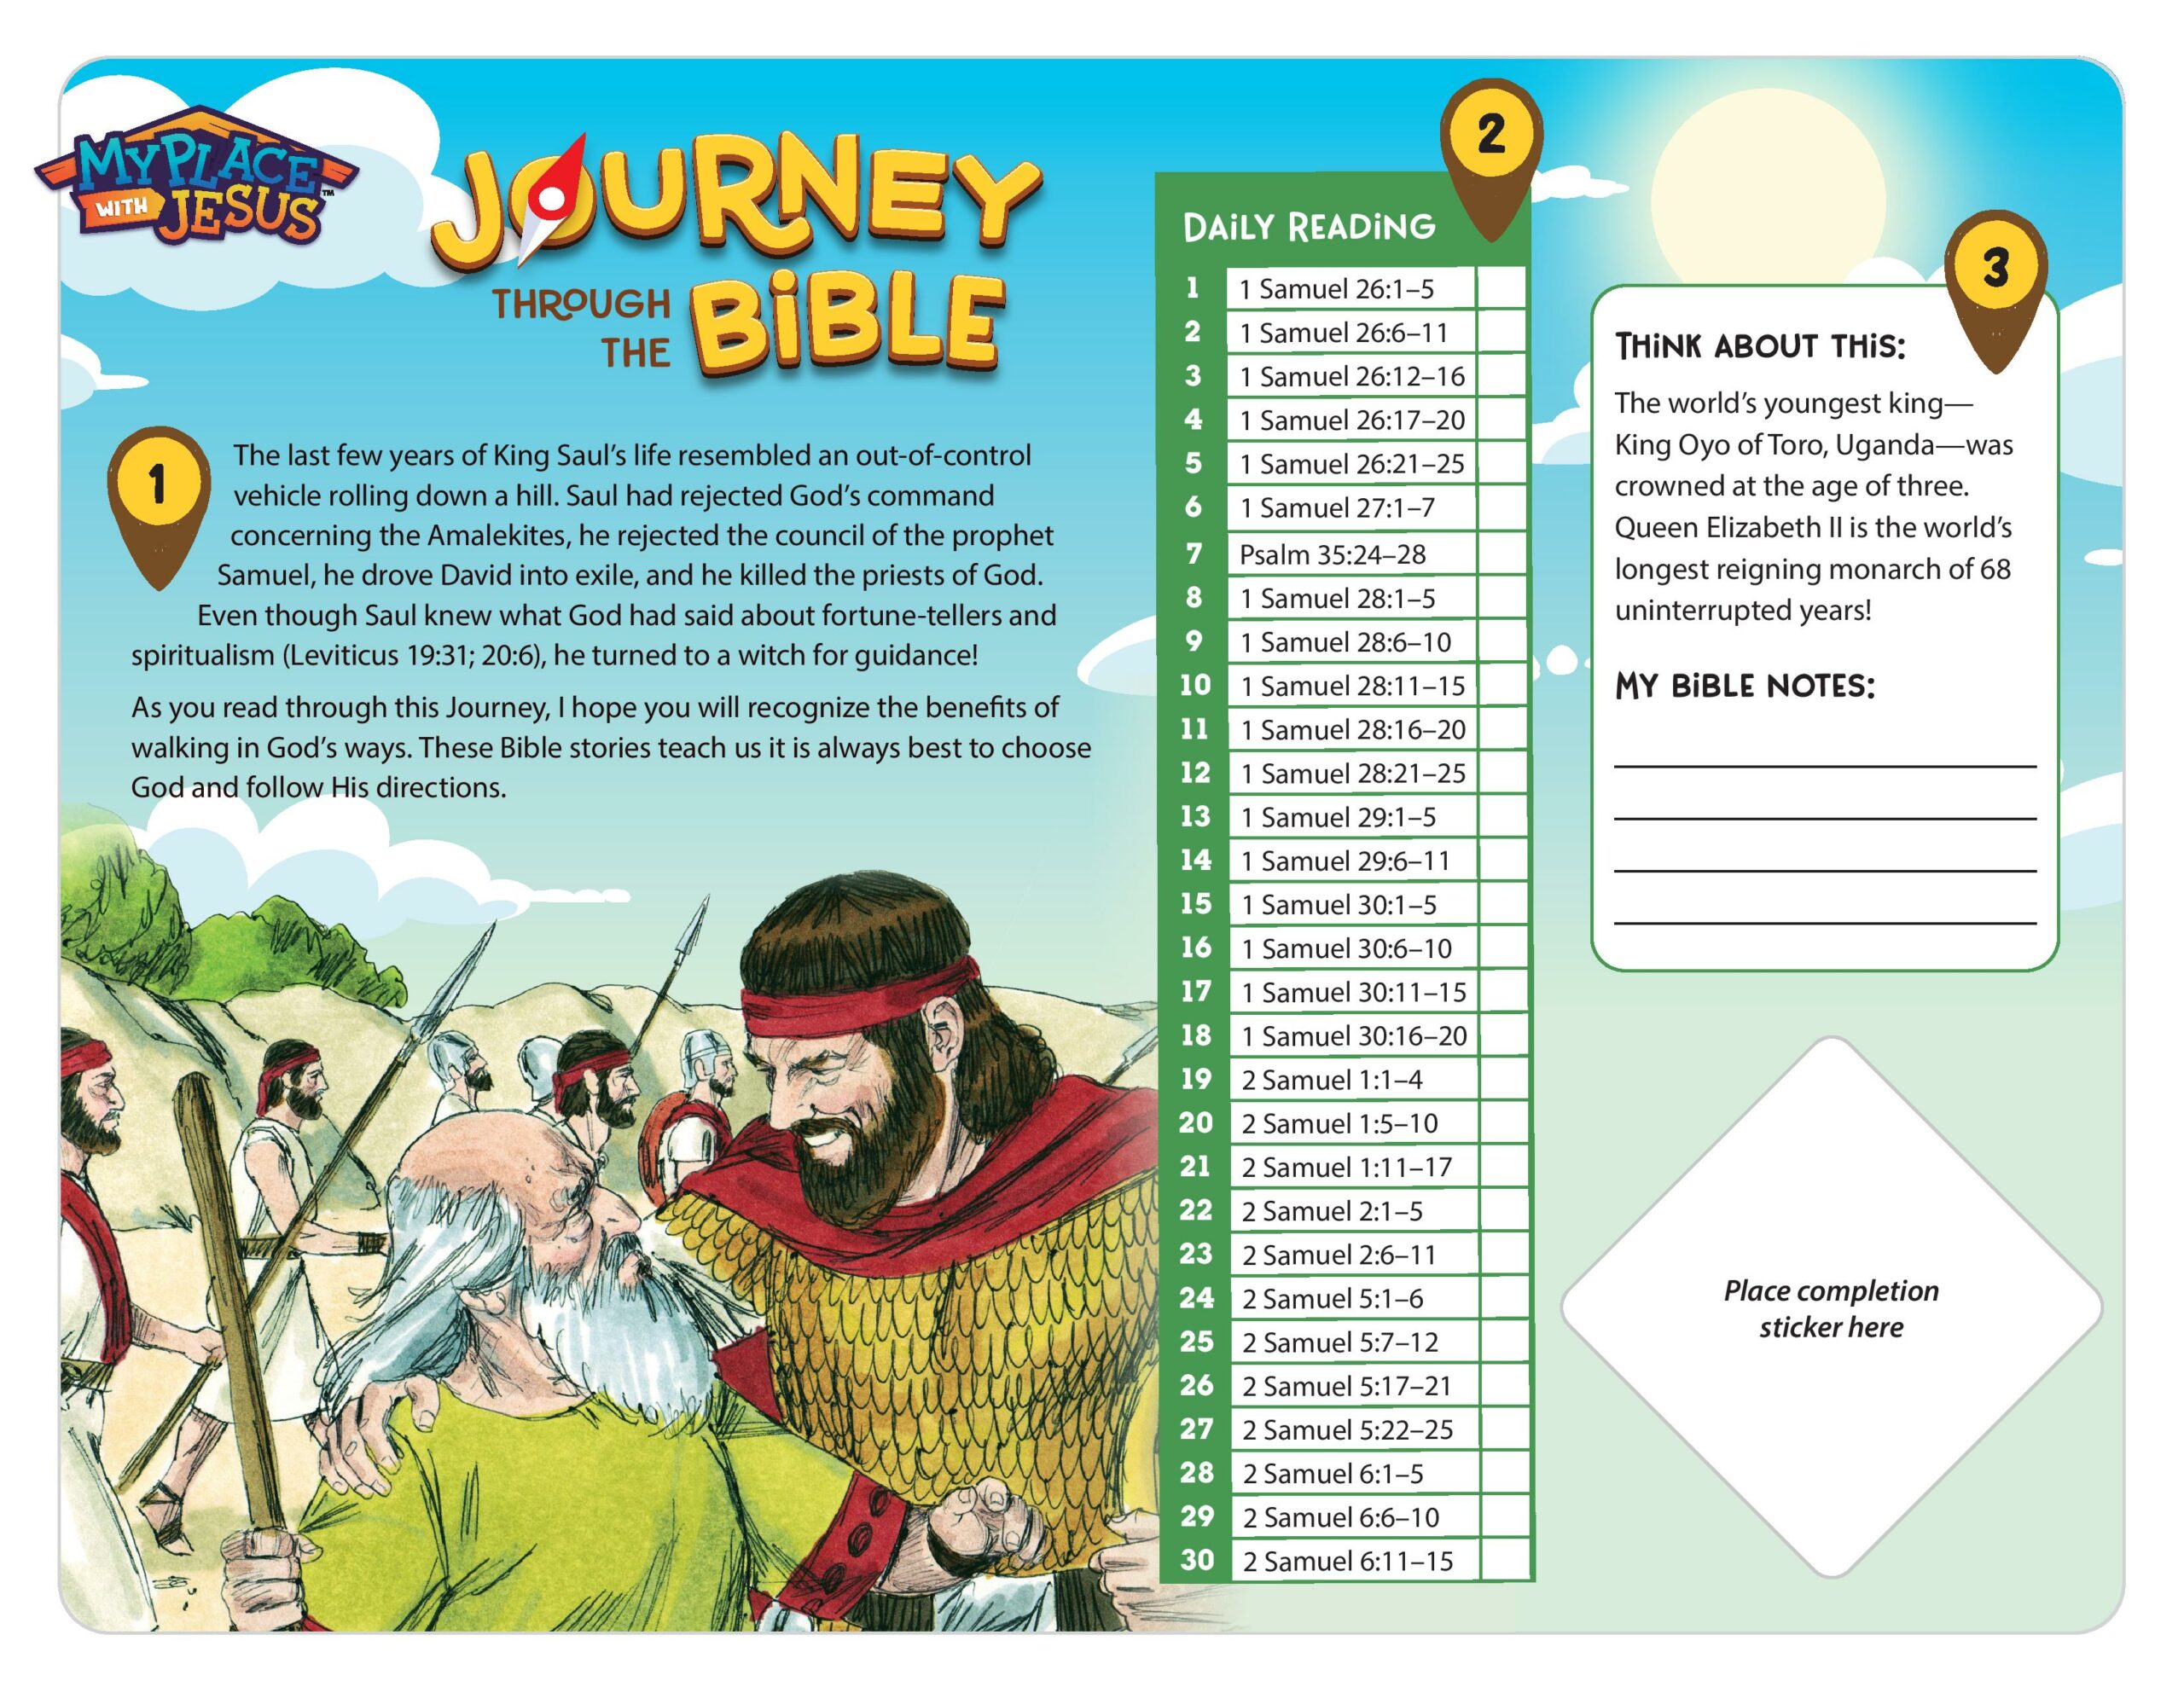 Journey through the Bible 16 tracking sheet